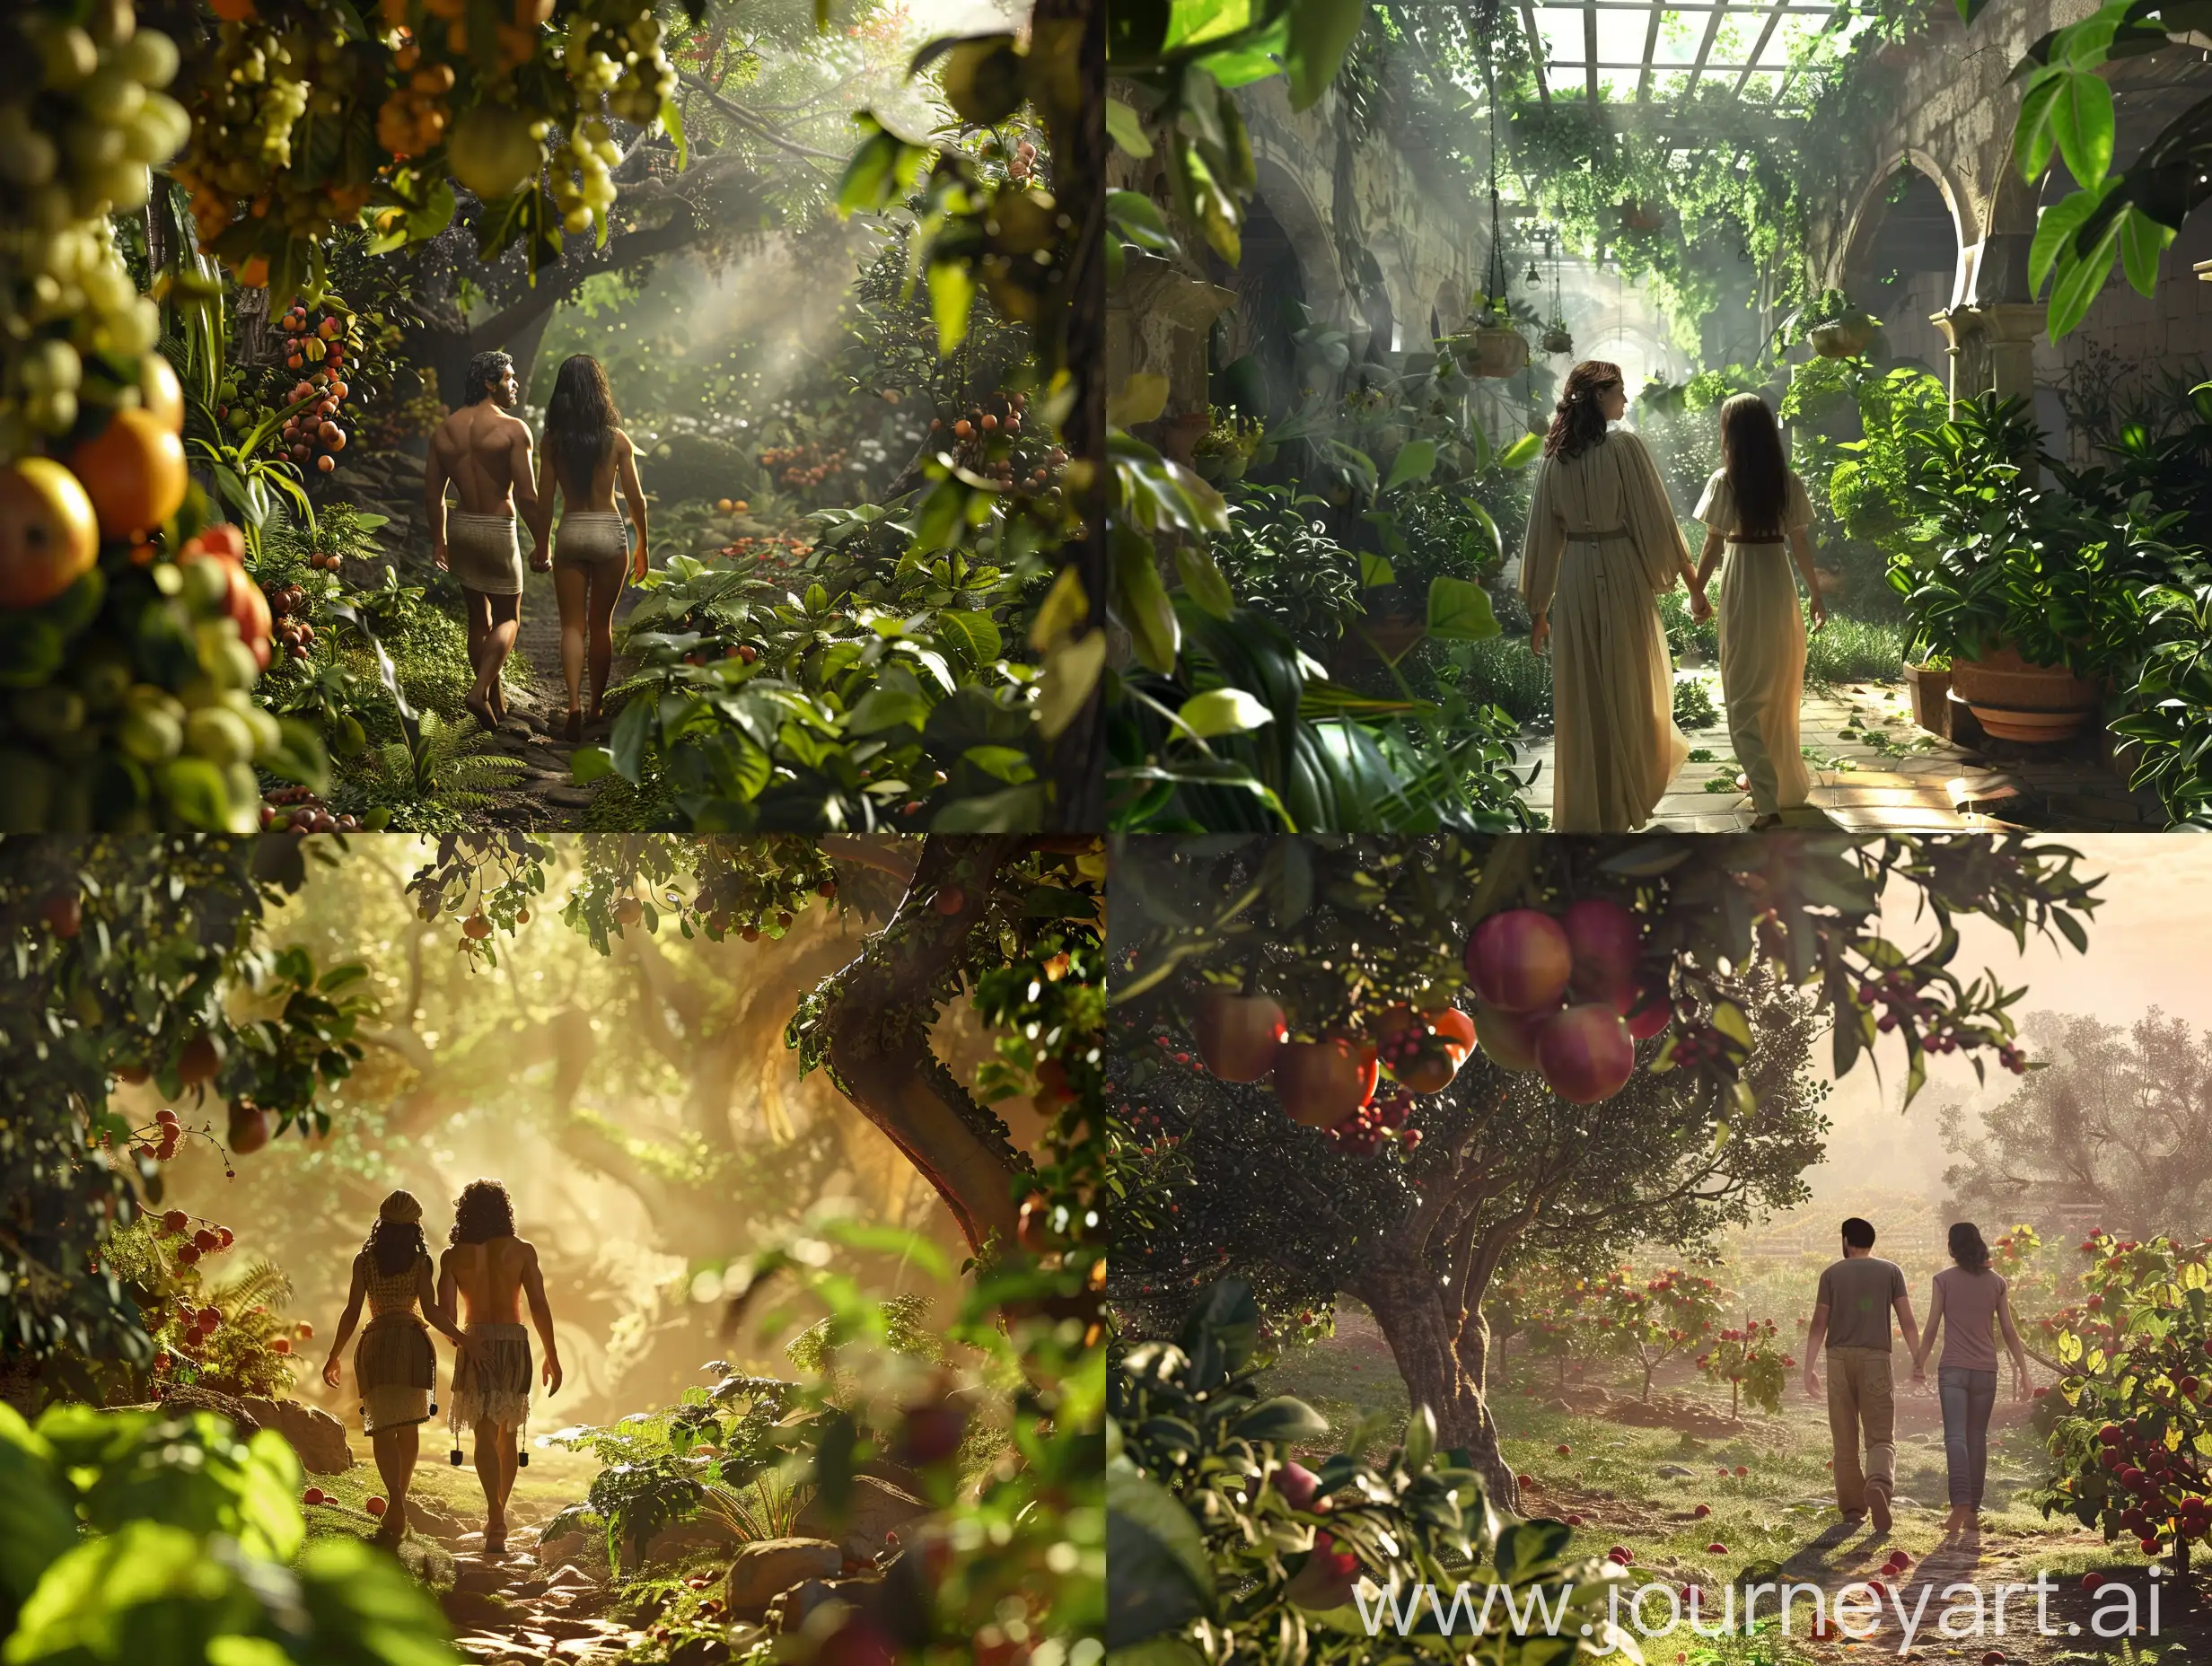 Show Adam and Eve walking through the garden, marveling at its beauty and space. Use close-up shots to capture their awe and wonder as they explore their surroundings.